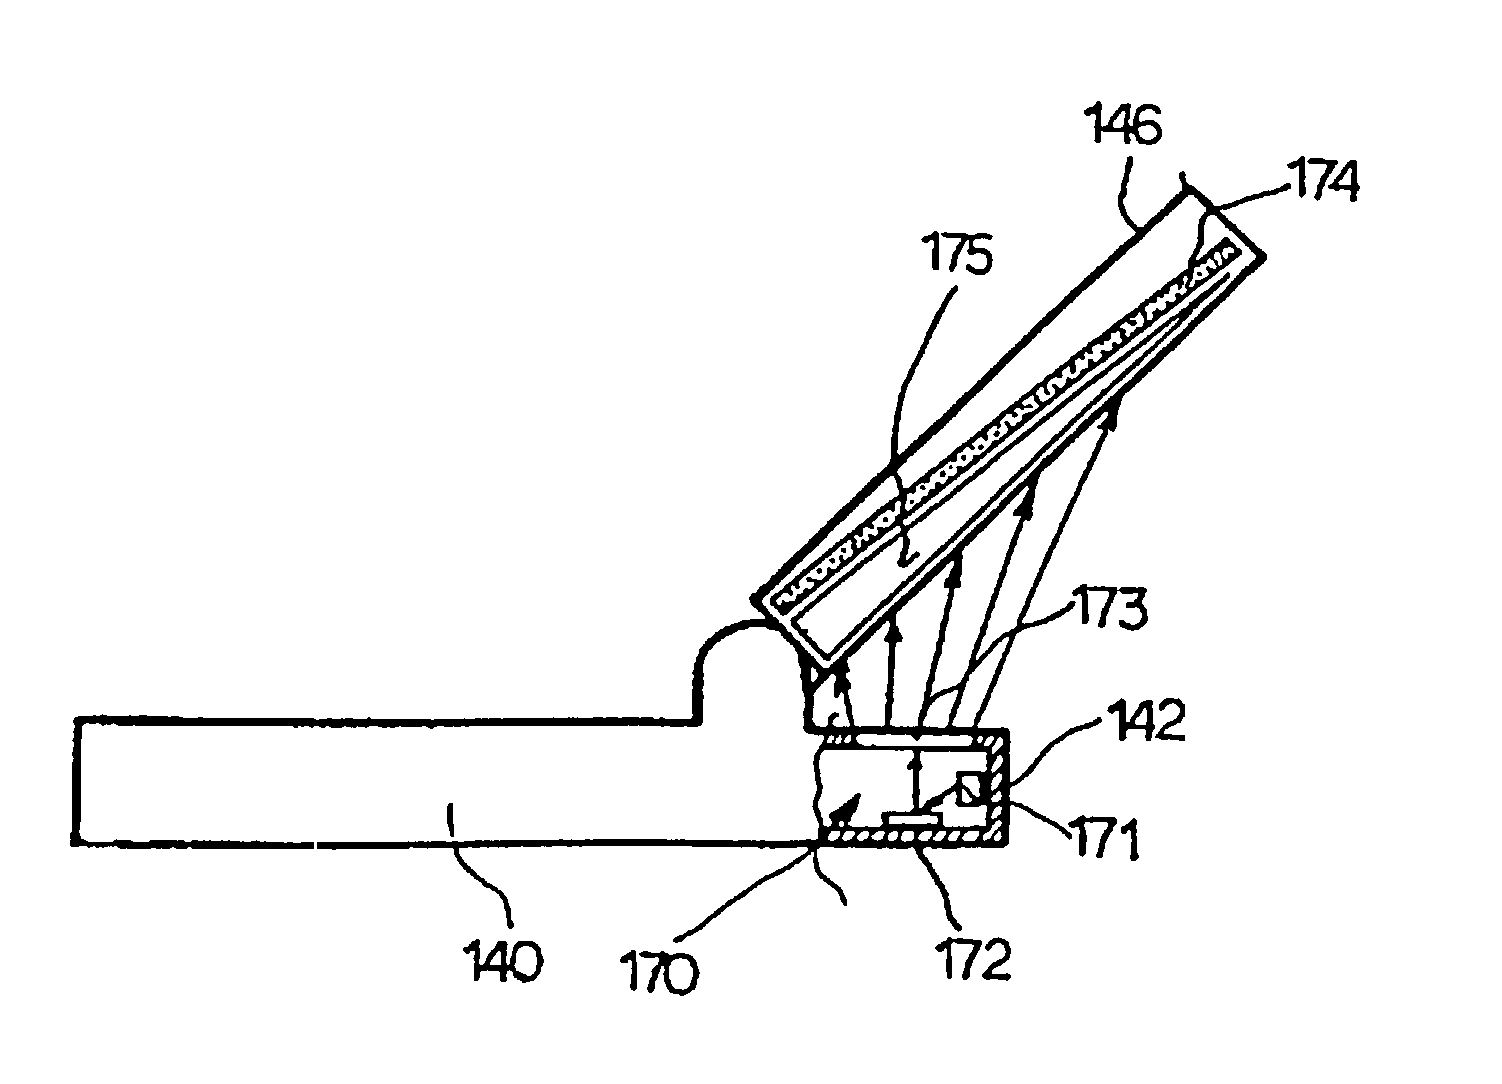 Portable terminal device having a display unit utilizing a holographic screen